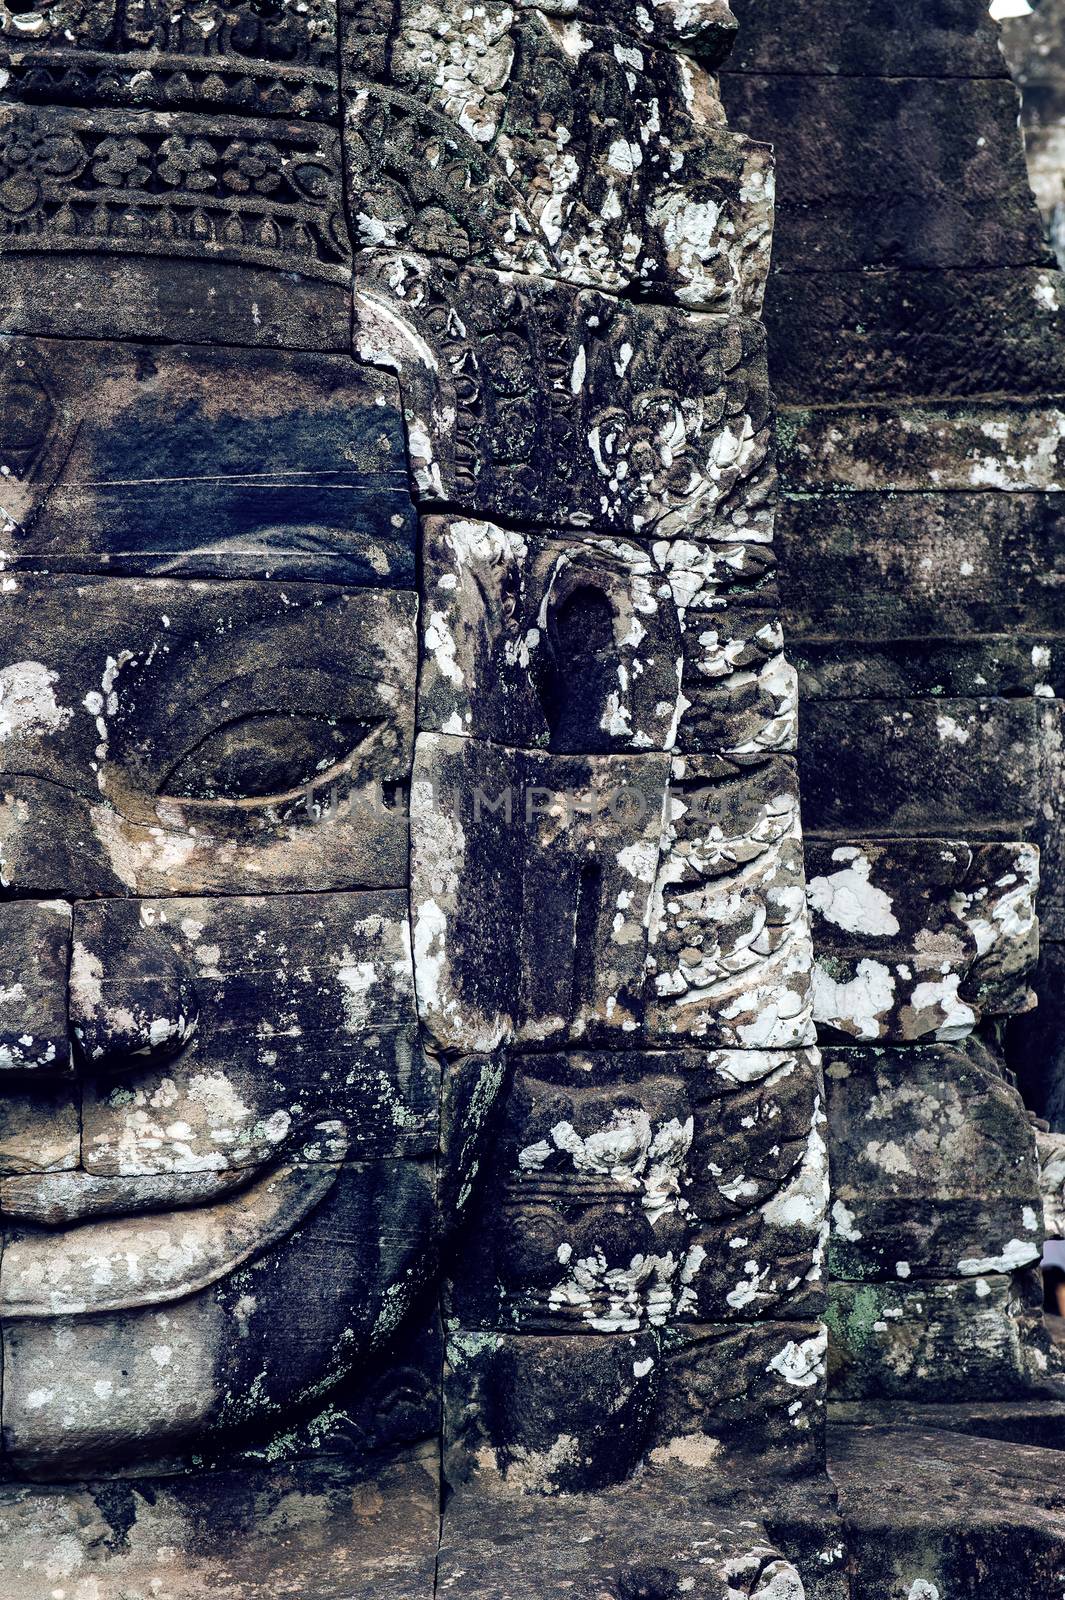 Ancient stone faces of Bayon temple, Angkor Wat, Siam Reap, Cambodia. by gutarphotoghaphy